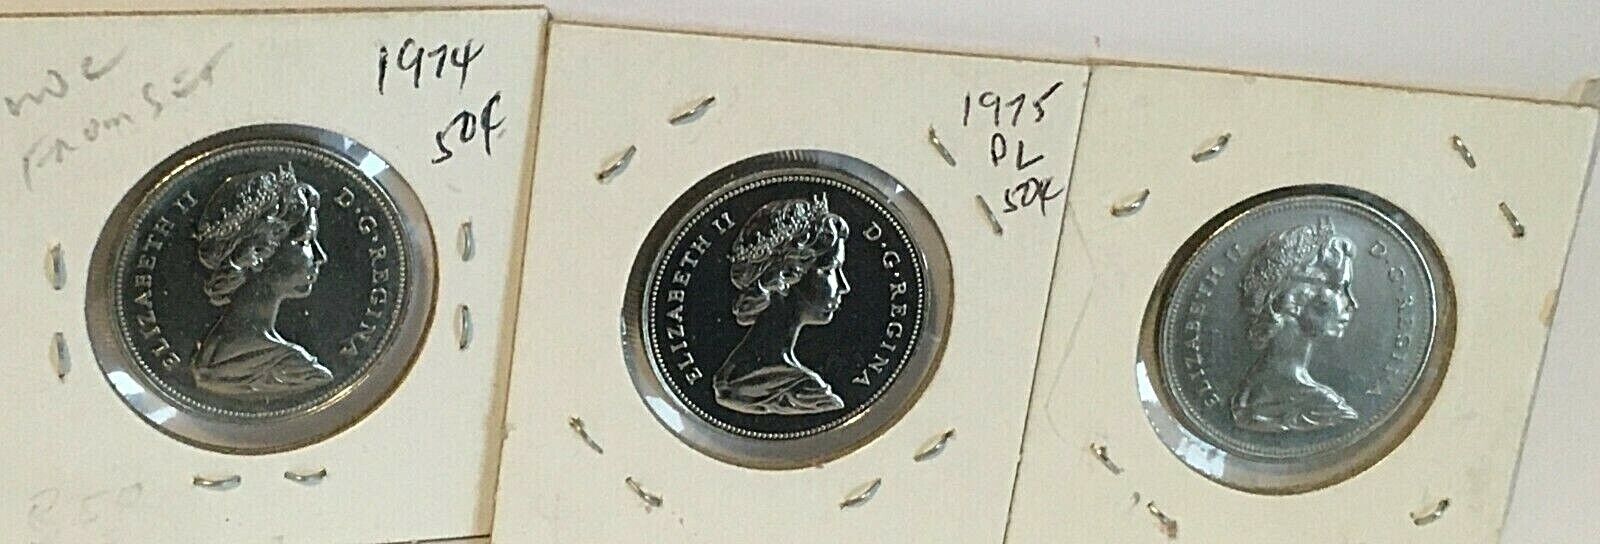 CANADA 1973 74 75  50 CENT NICKEL COIN FROM A HUGE COLLECTION 'KEEP FOLLOWING US Без бренда - фотография #2